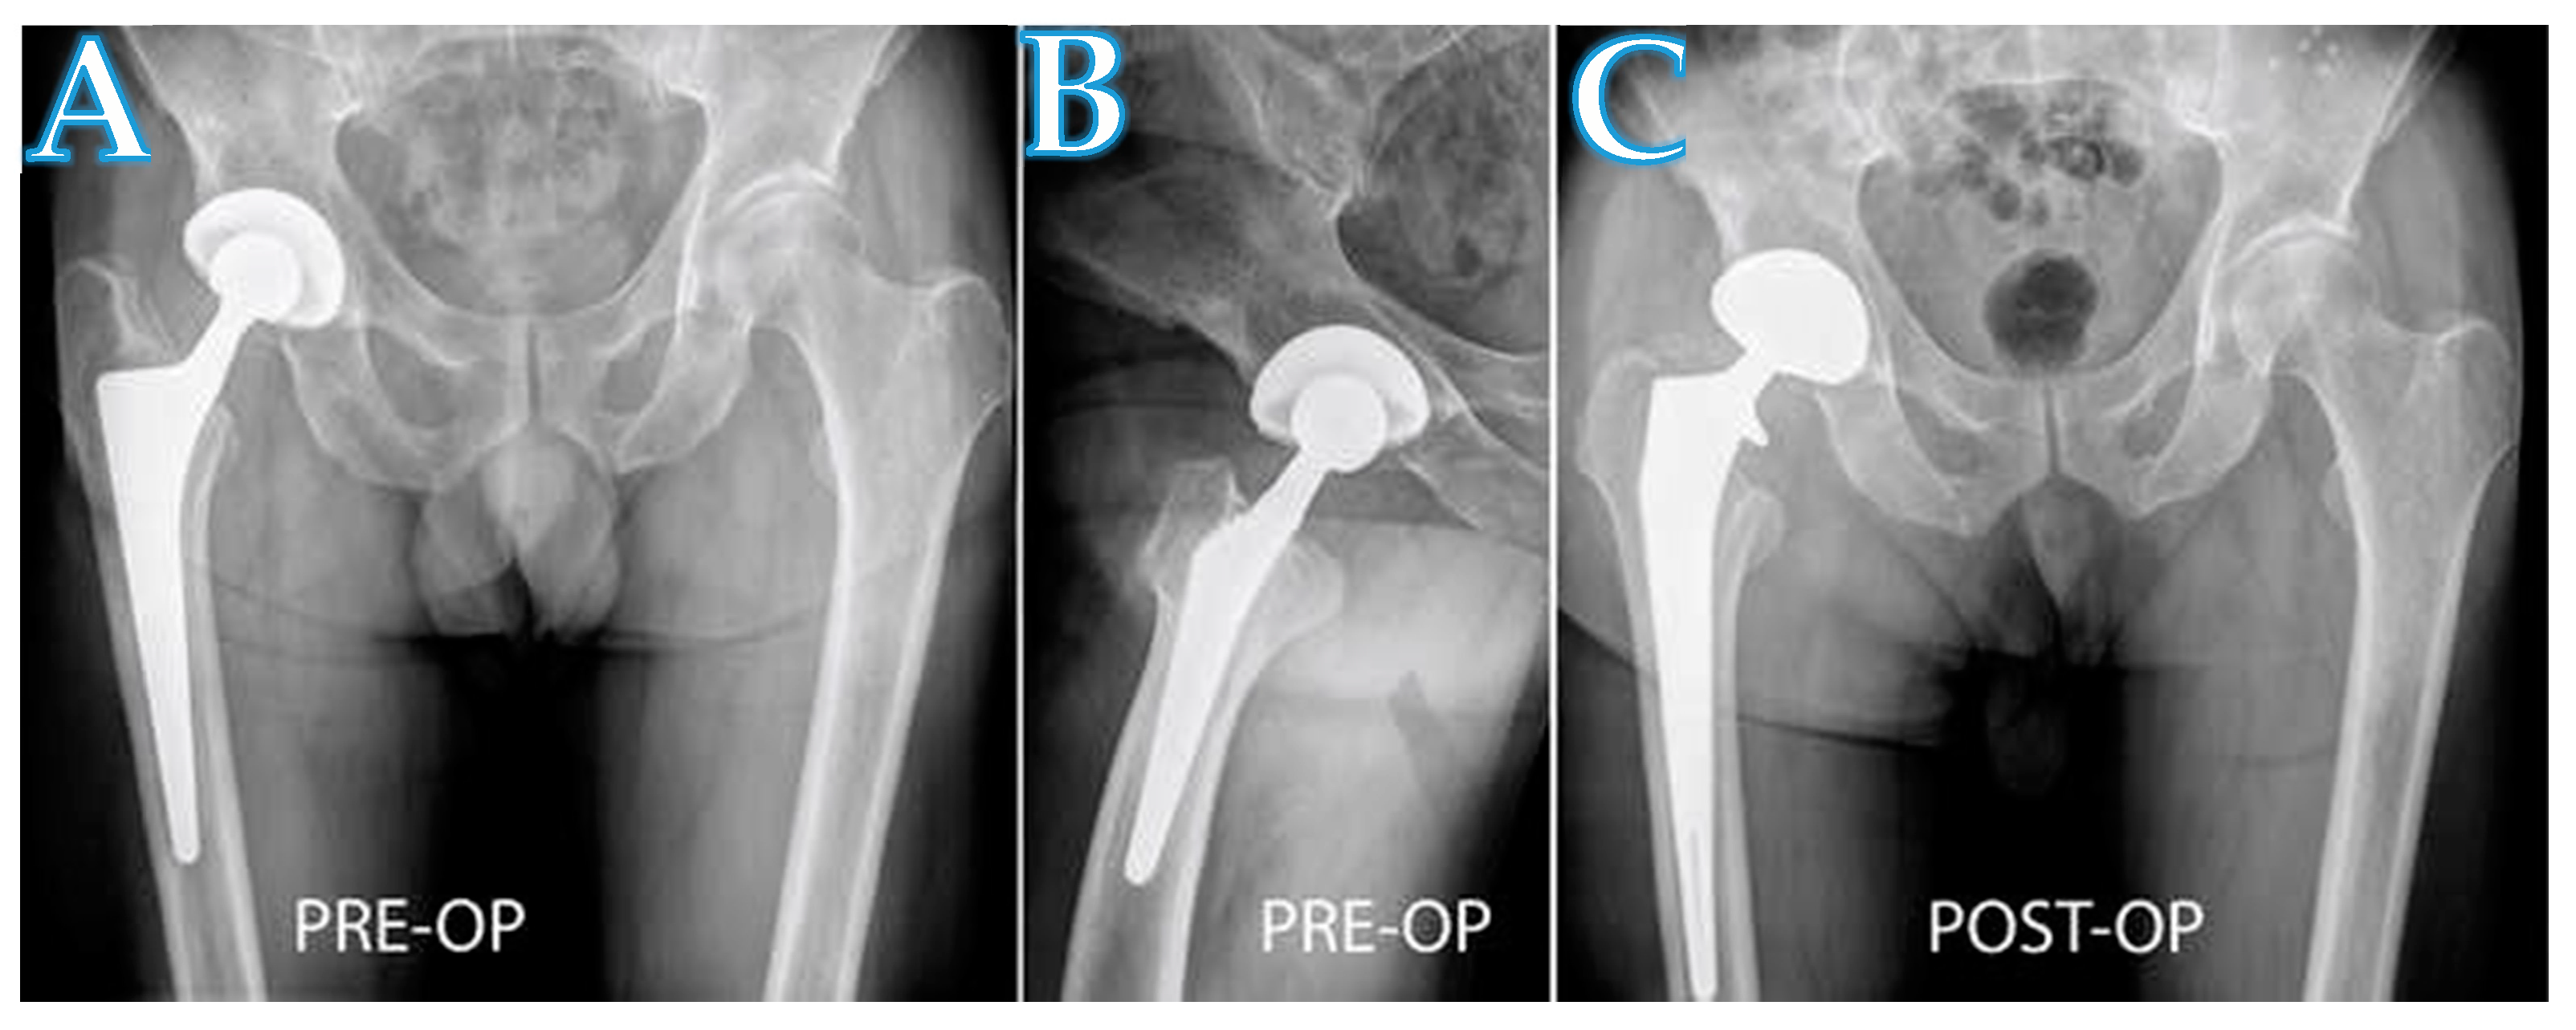 Total Hip replacement(posterior approach): Exeter femoral stem and